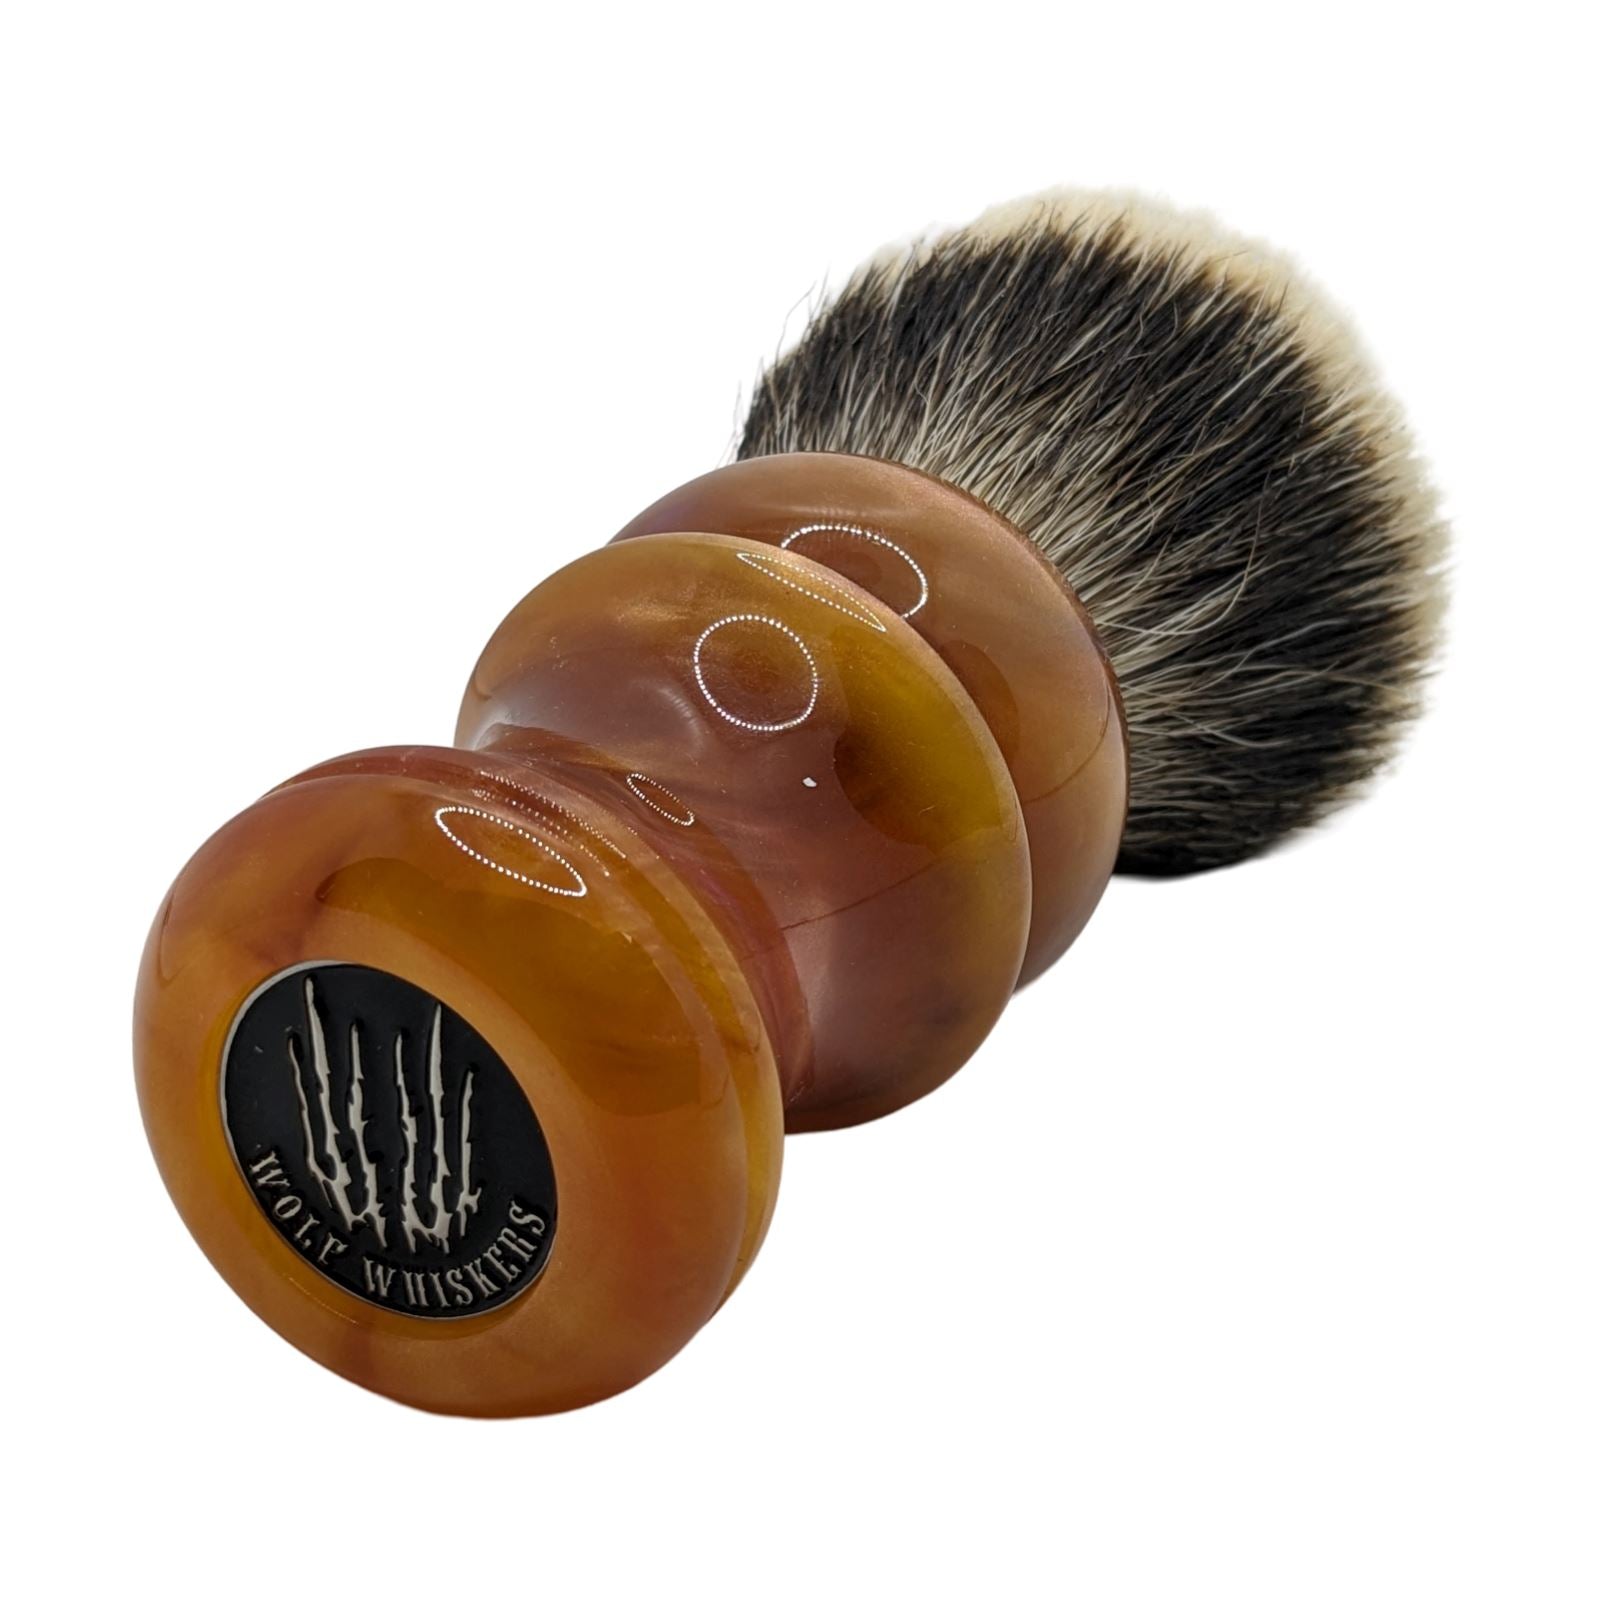 Solar Flare Wolf Whiskers Handle (TNS 28mm, M6 Hybrid) Shaving Brush - Wolf Whiskers/Turn-N-Shave (Used) Shaving Brush MM Consigns (AU) 